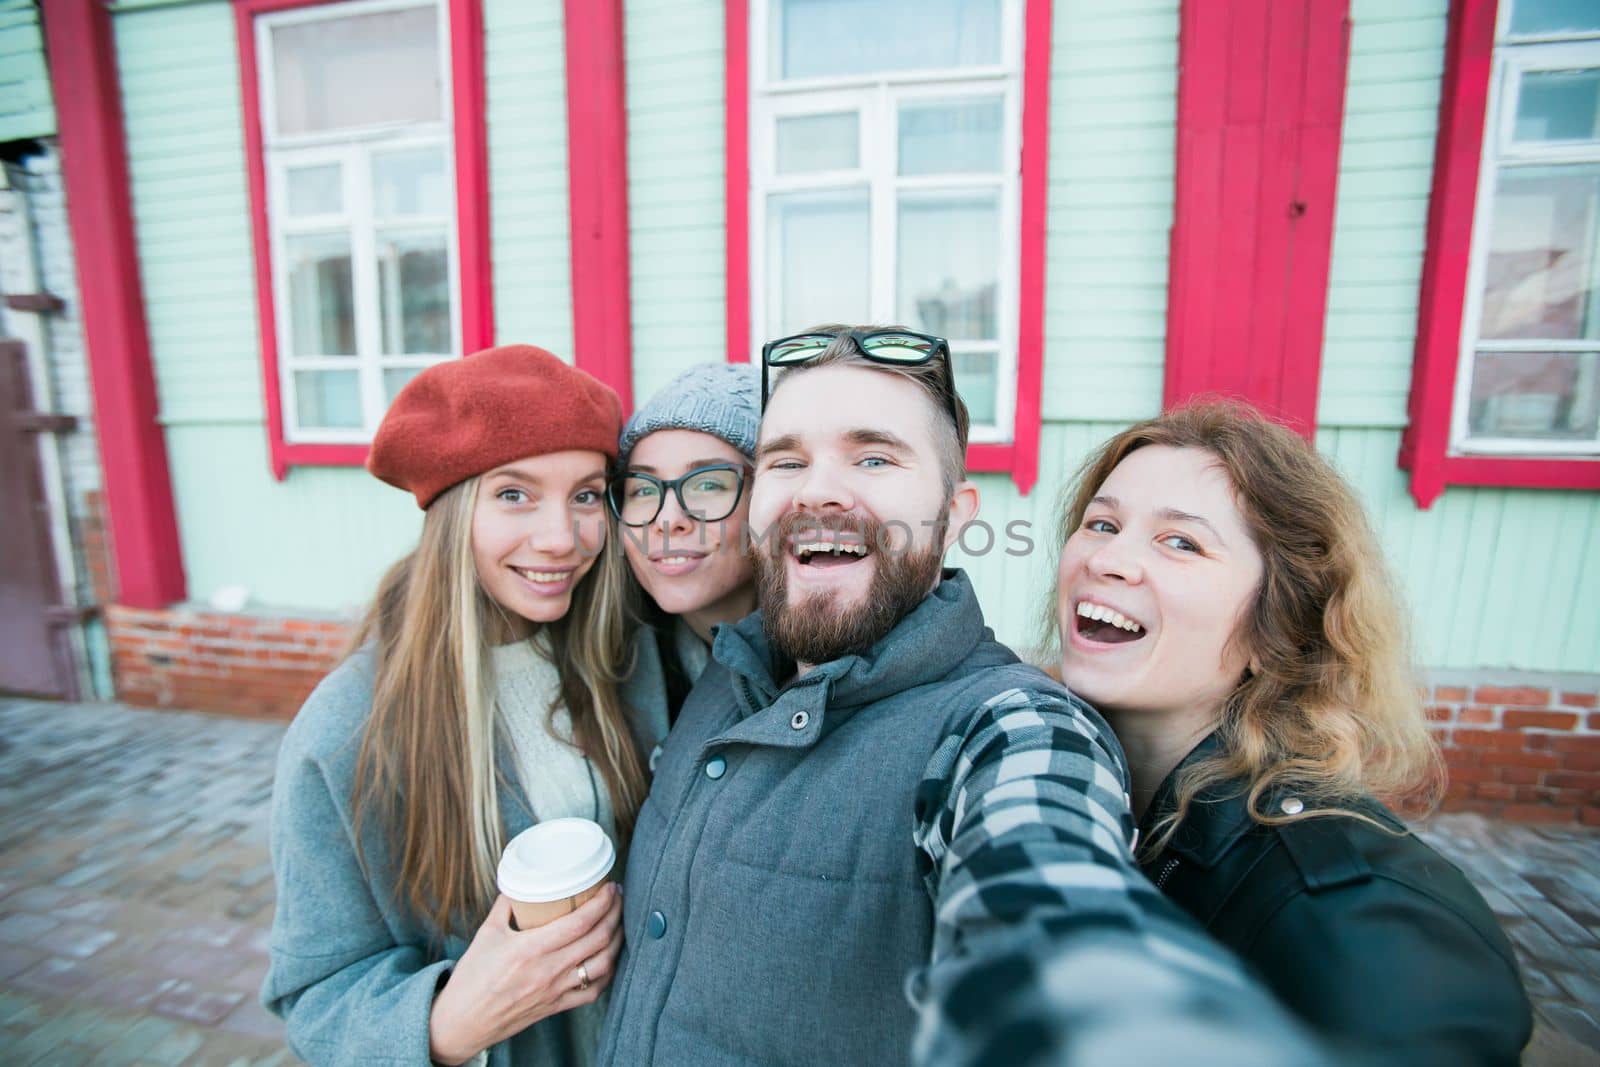 Group of happy young friends having fun on city street and taking selfie - friendship and photographing